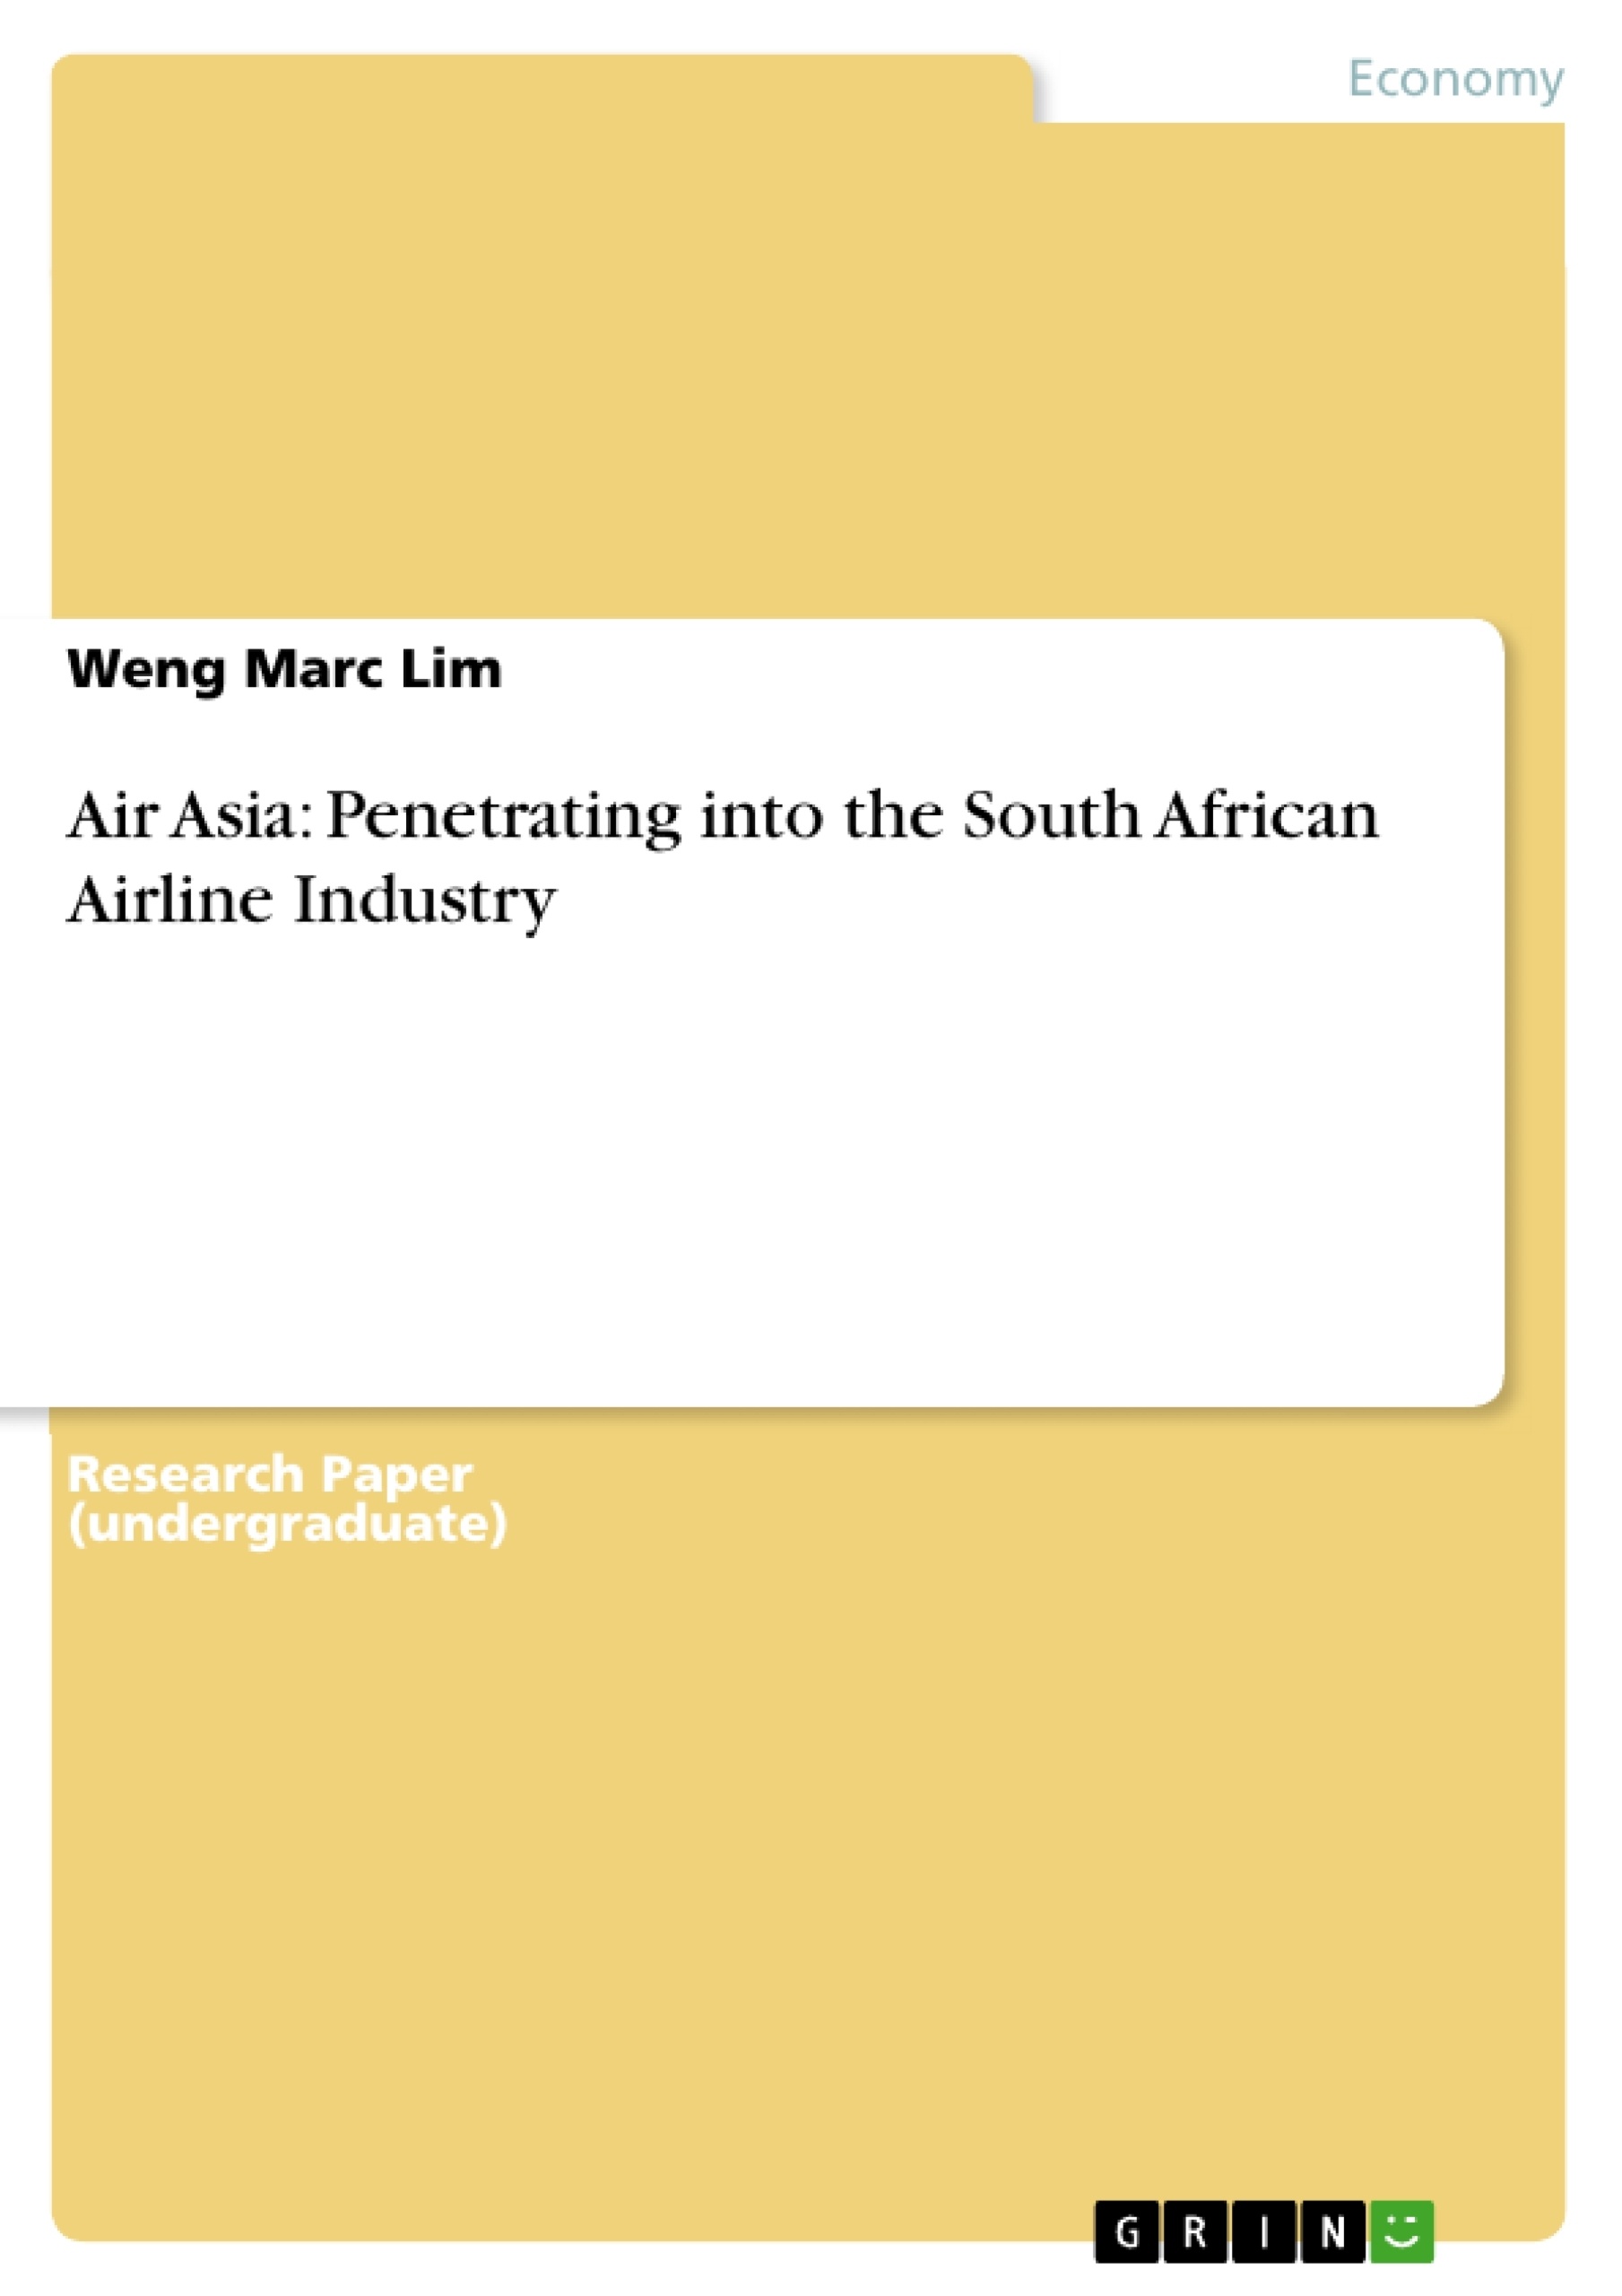 Titel: Air Asia: Penetrating into the South African Airline Industry